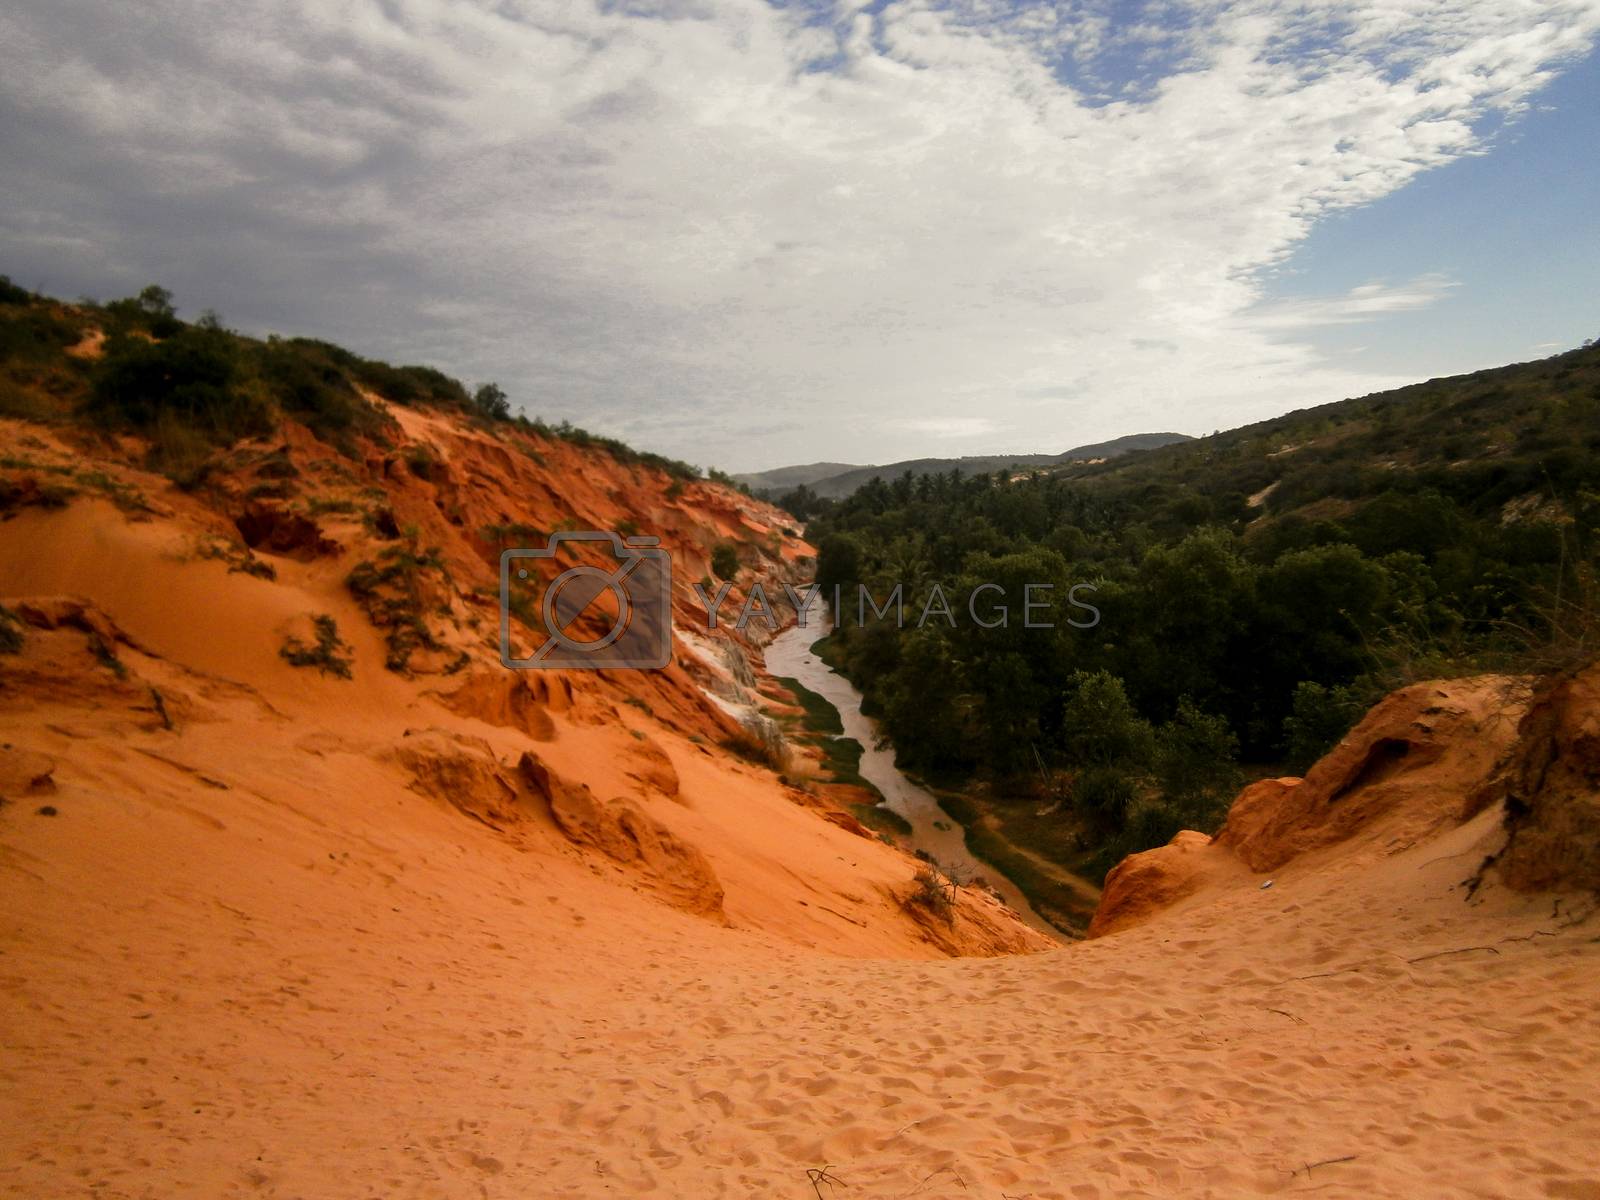 Royalty free image of Sand, forest and water by arvidnorberg